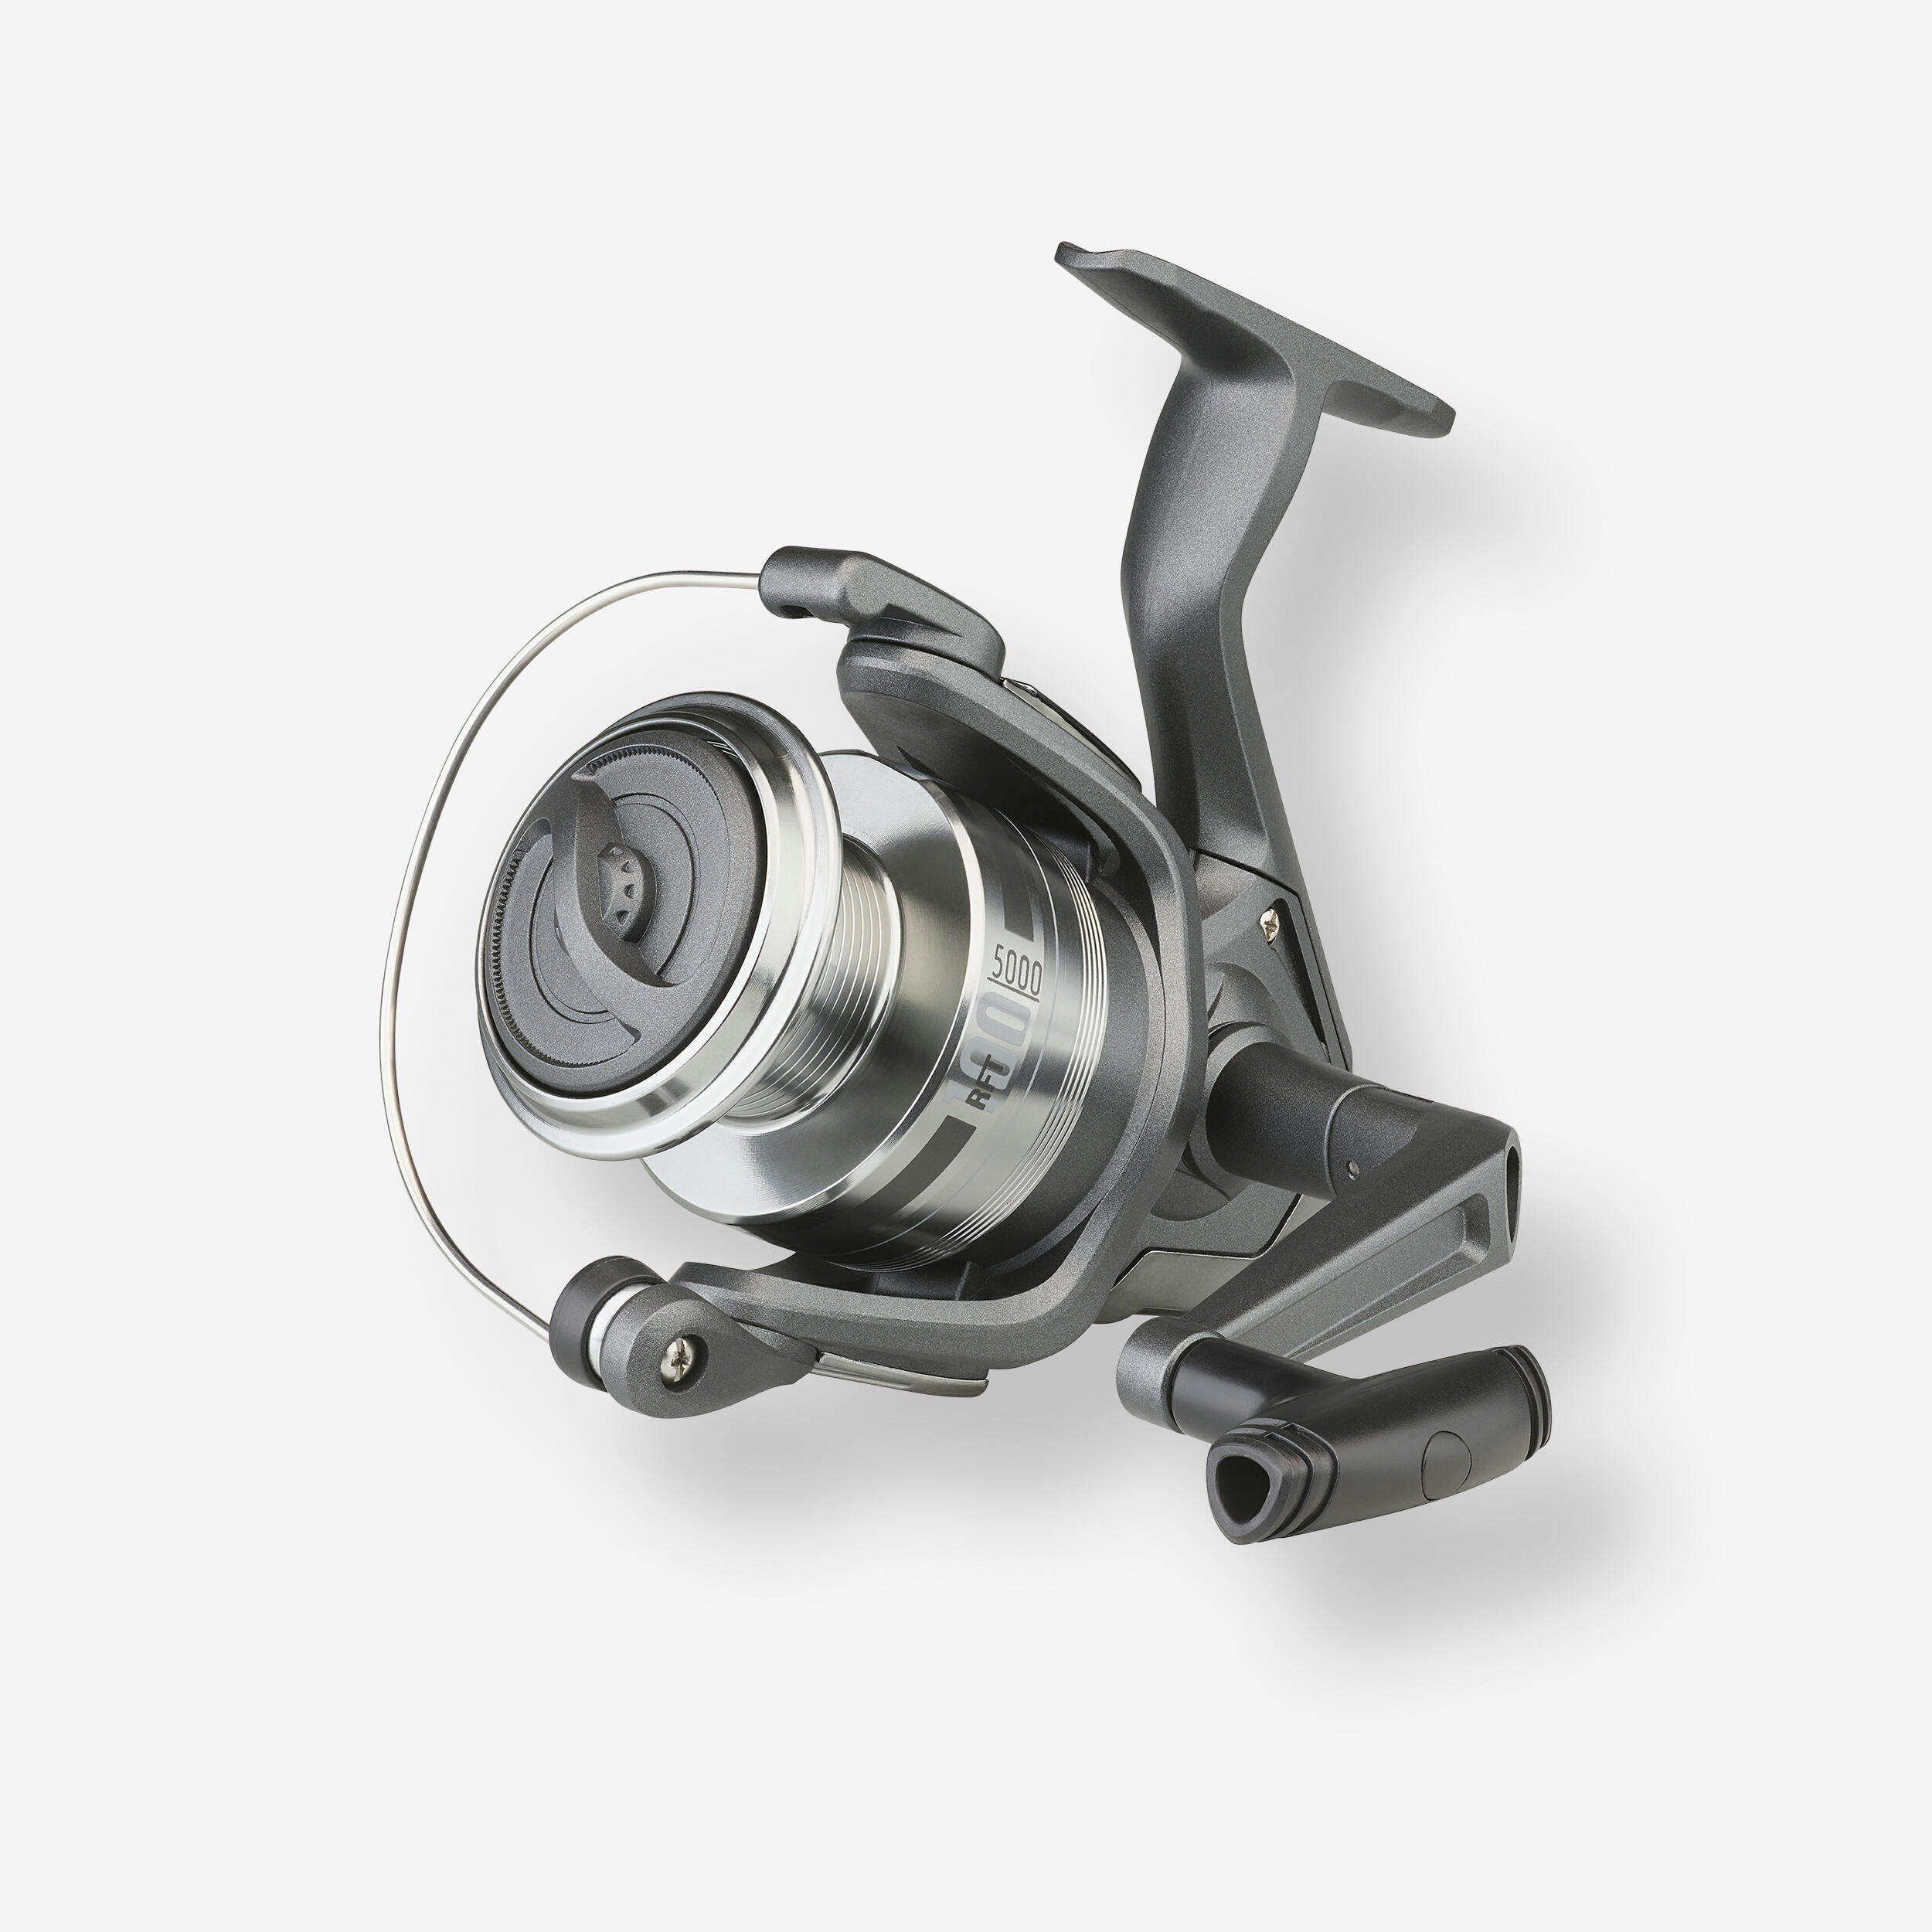 Caperlan Fishing Reel RFT 100 - 5000 - One Size